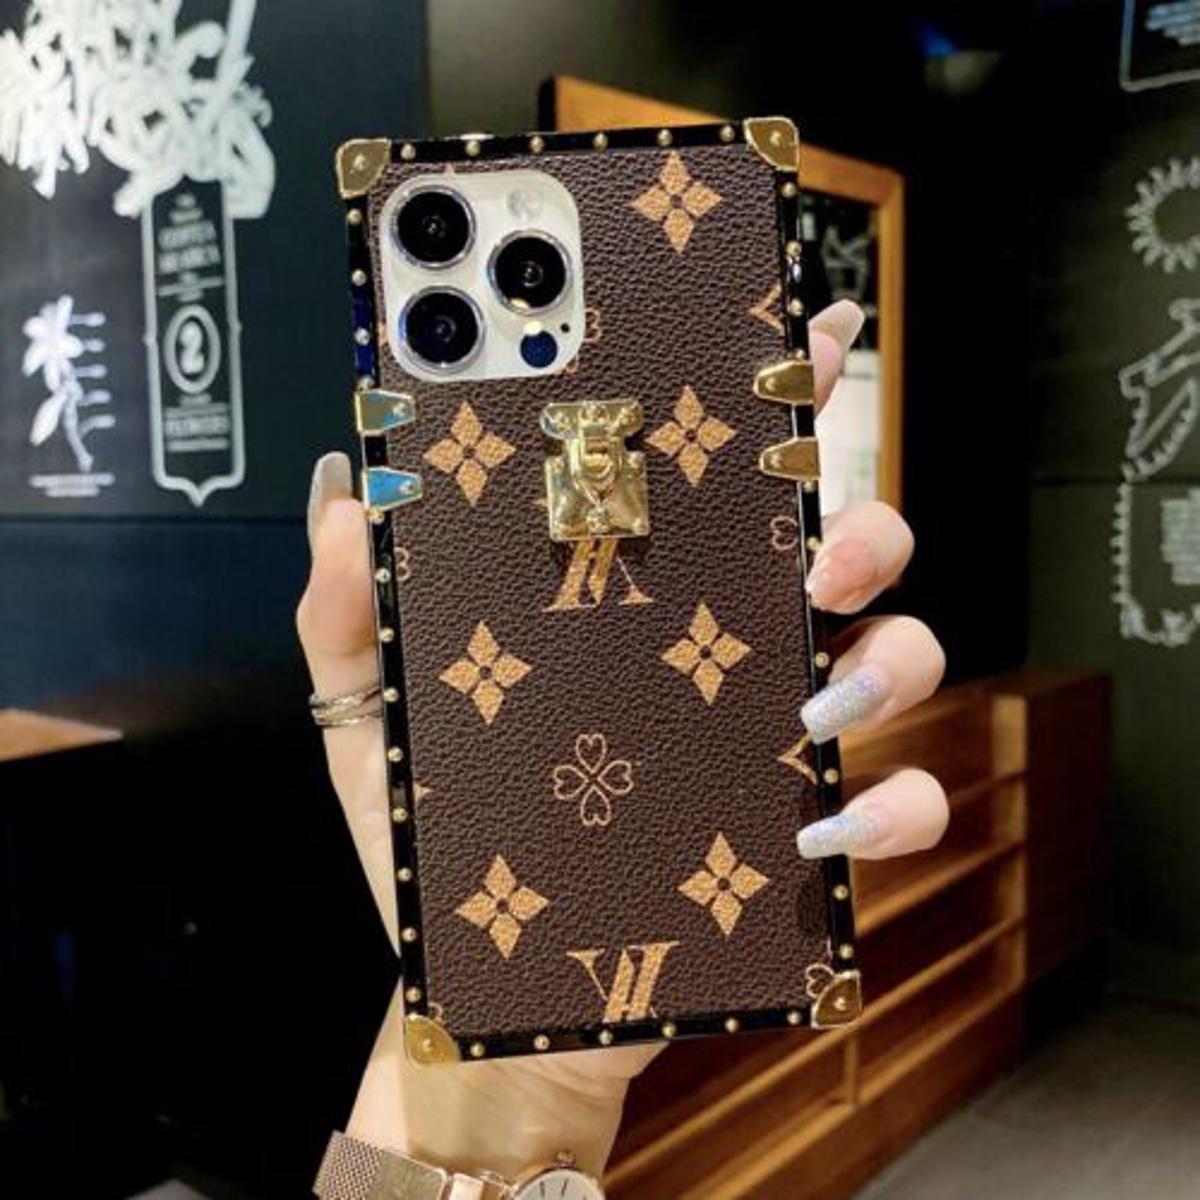 Lv Mobile Cover at Best Price in Pakistan - (2023) 